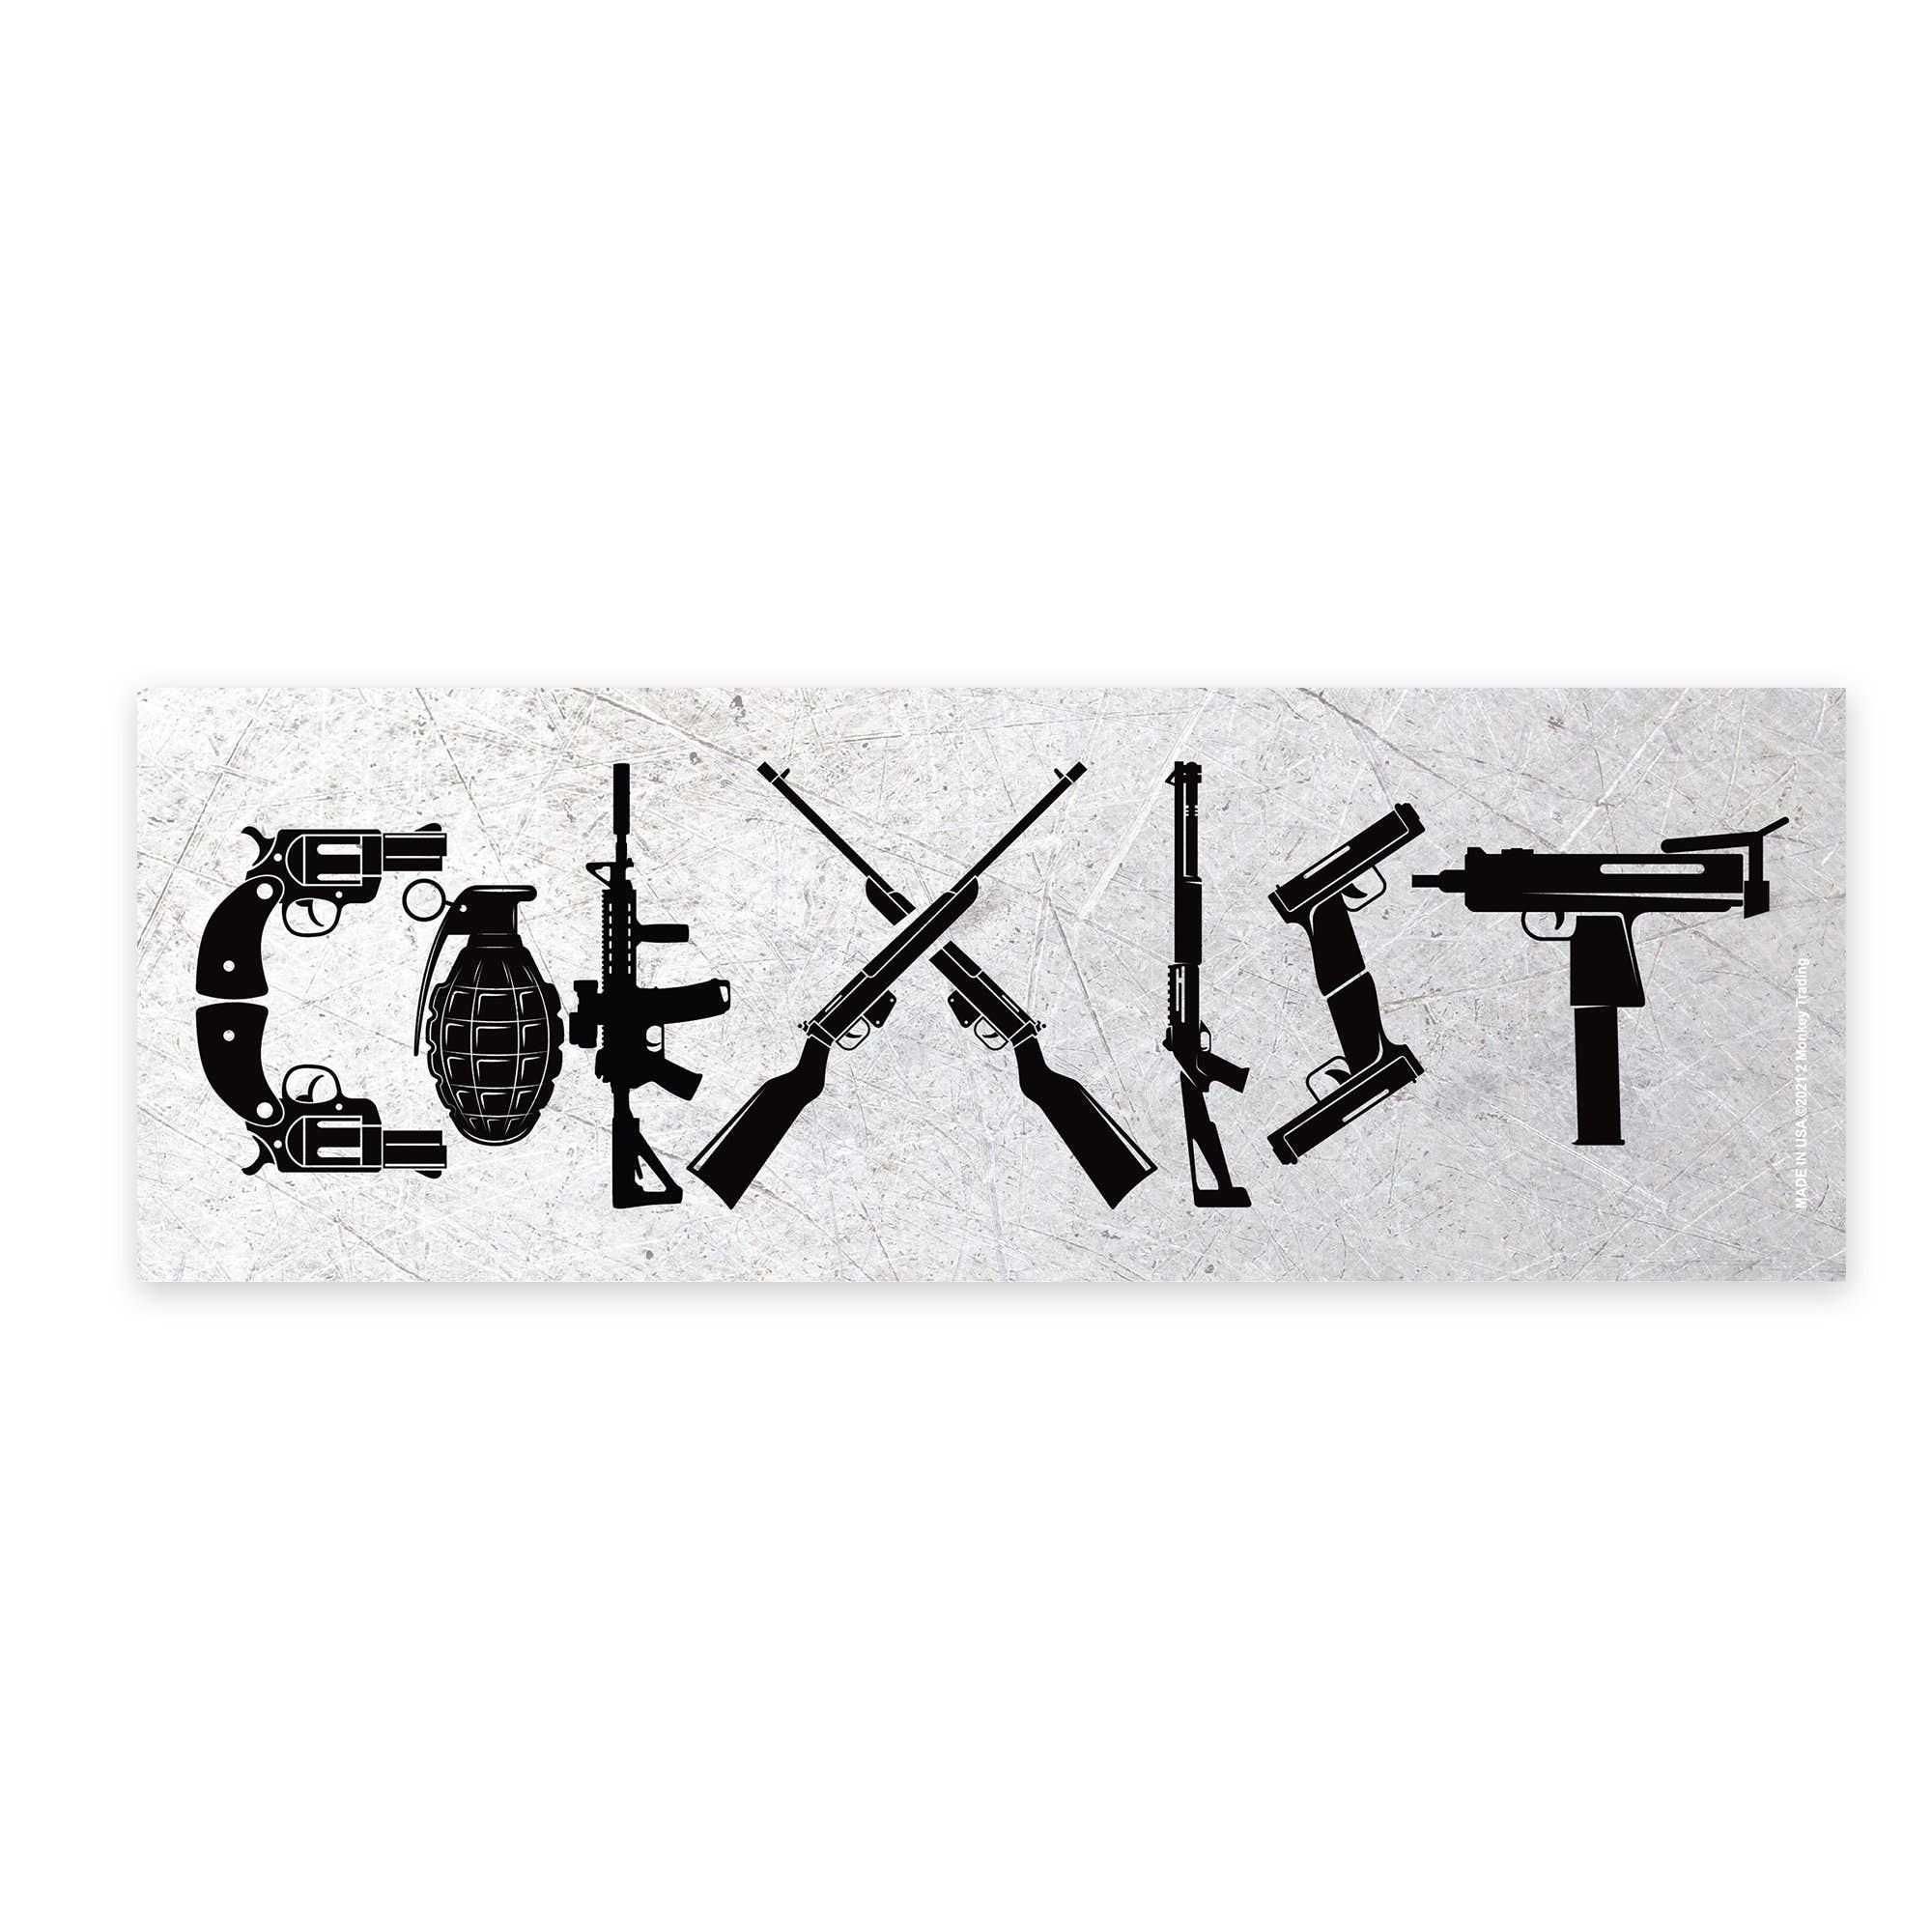 Coexist - 2.75 x 8.5 in. Decal